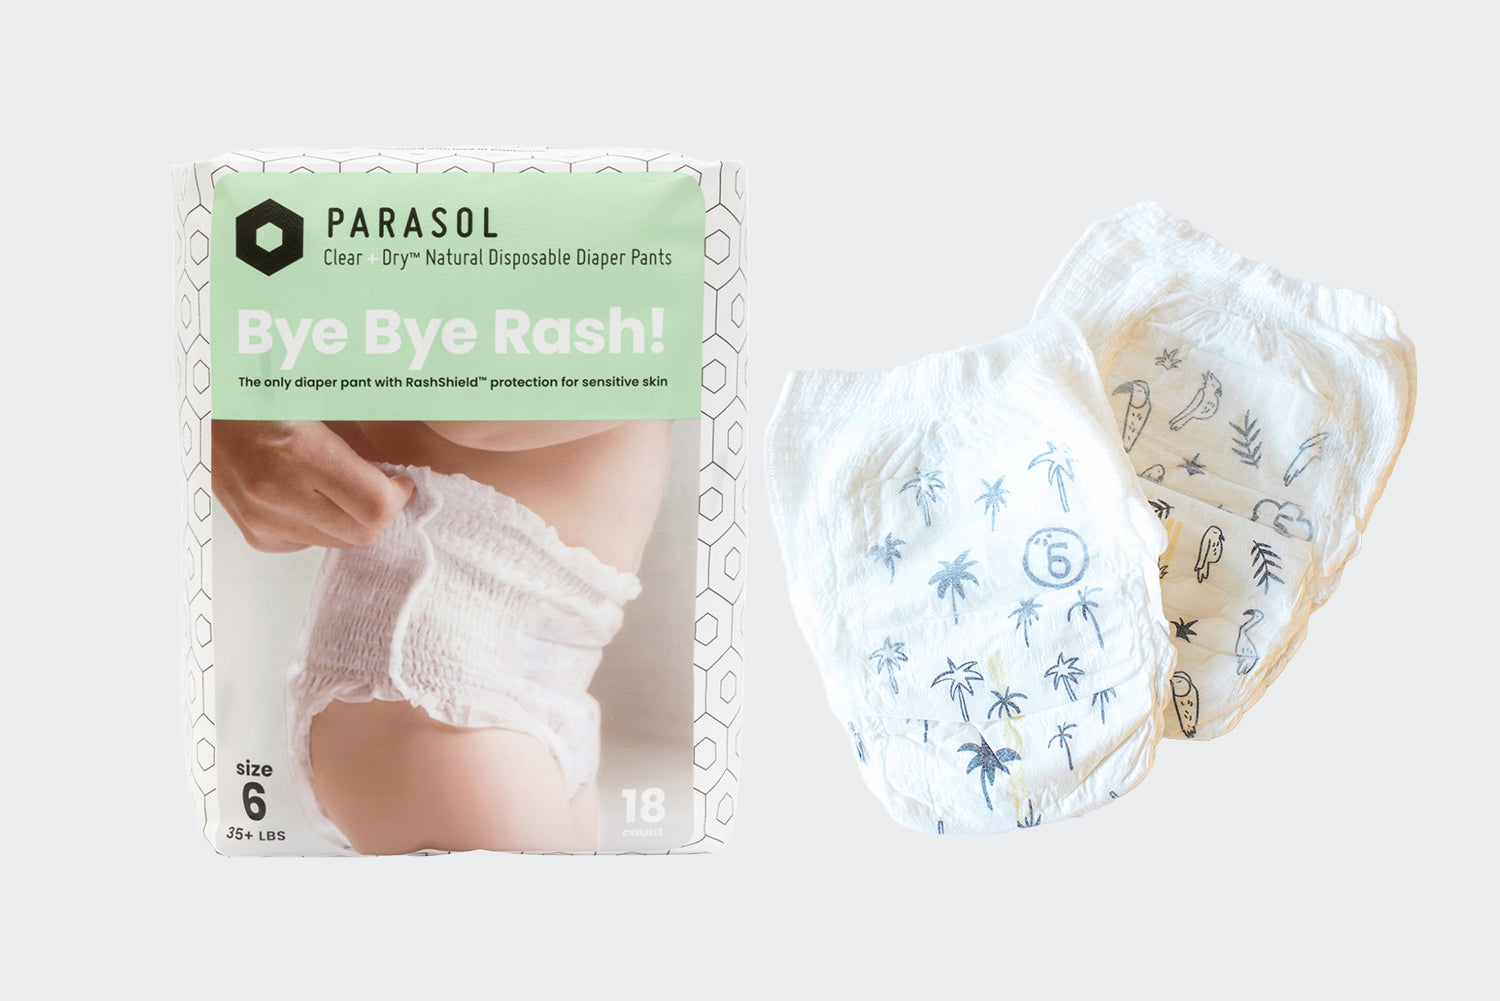 Clear Dry Natural Disposable Diaper Pants